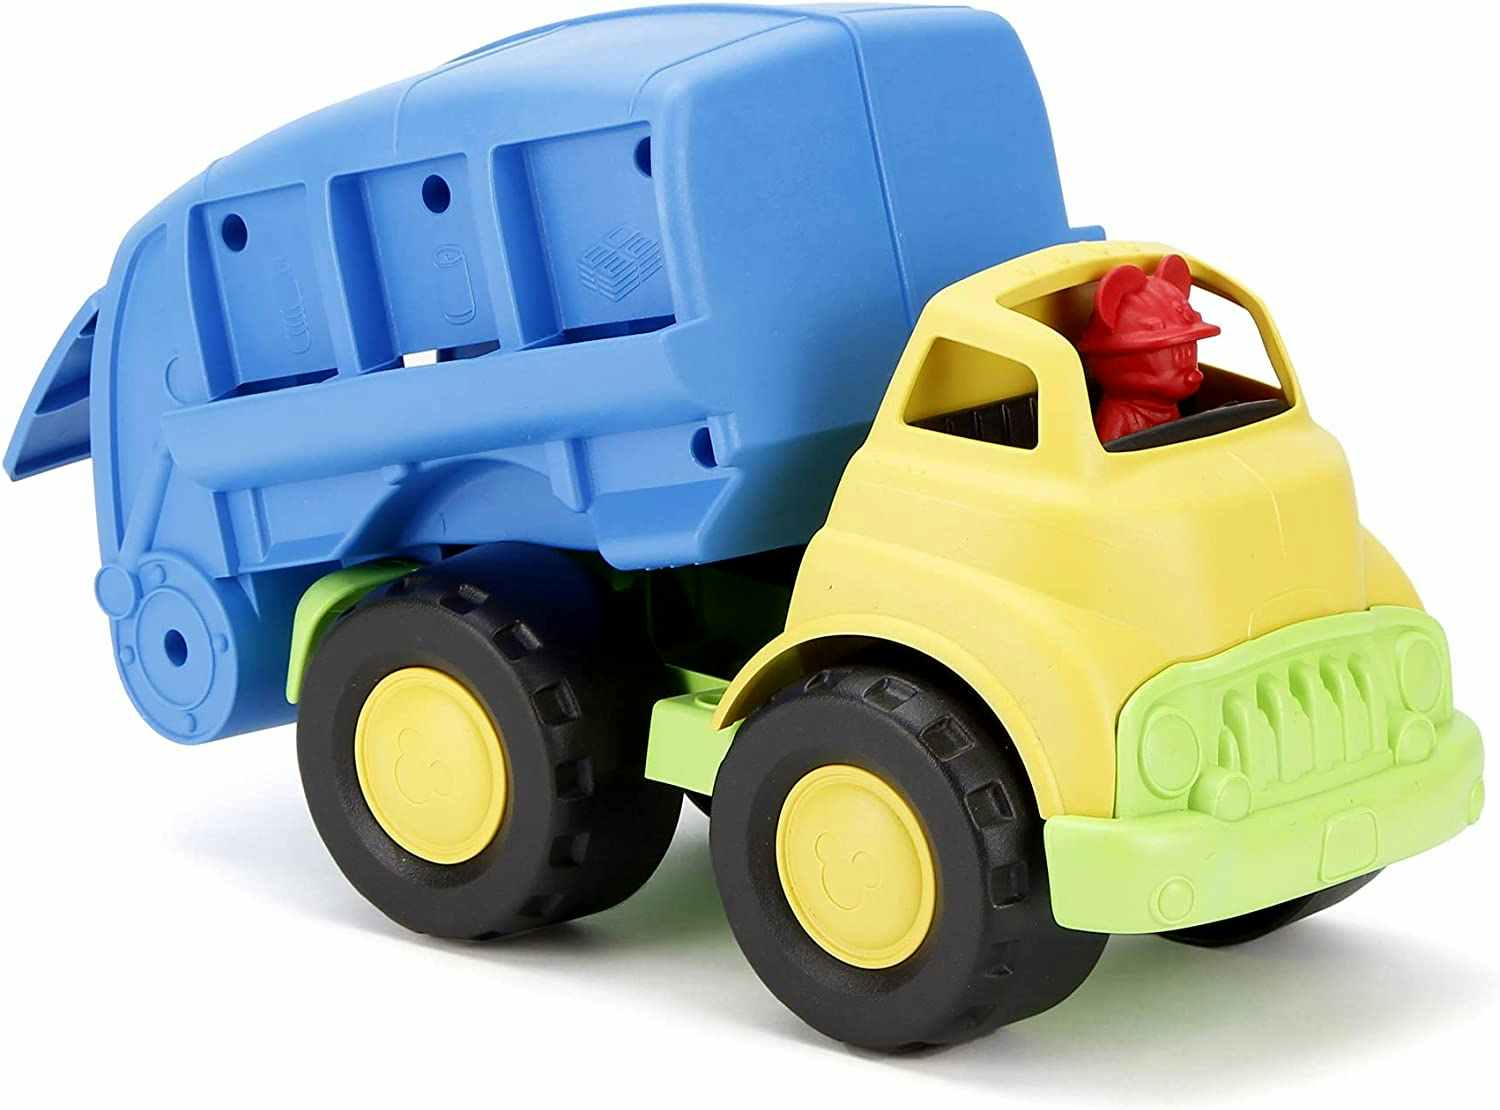 A Green Toys Mickey Mouse recycling truck toy.